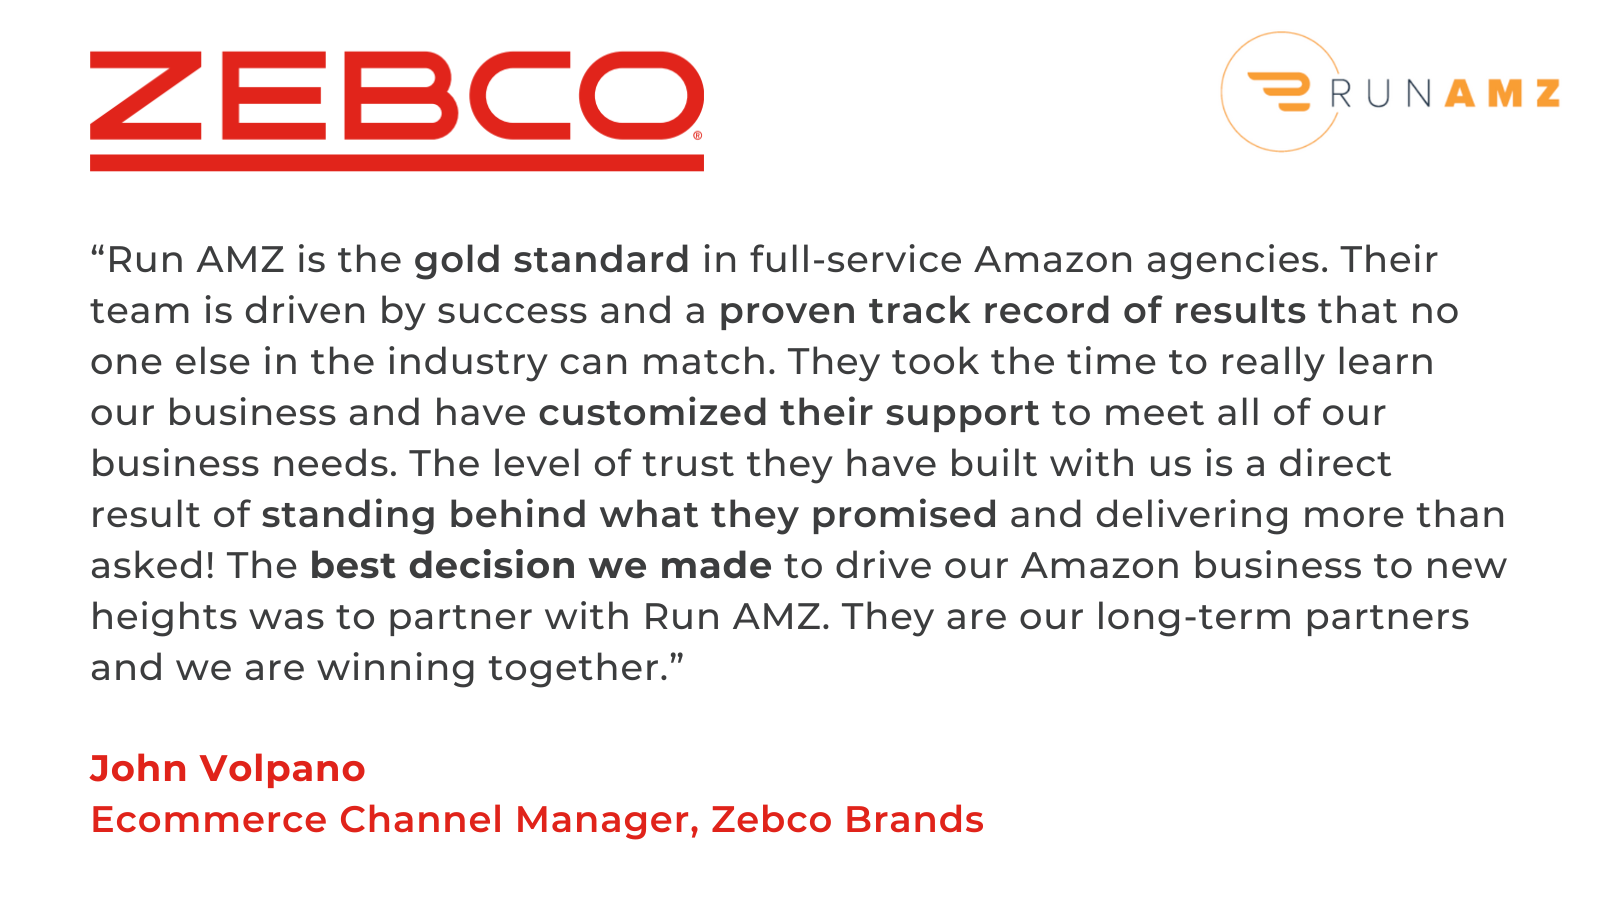 Red Zebco logo and orange Run AMZ logo at the top. Quote underneath of the brand's testimonial from working with the agency. Quote by John Volpano, the Ecommerce Channel Manager.